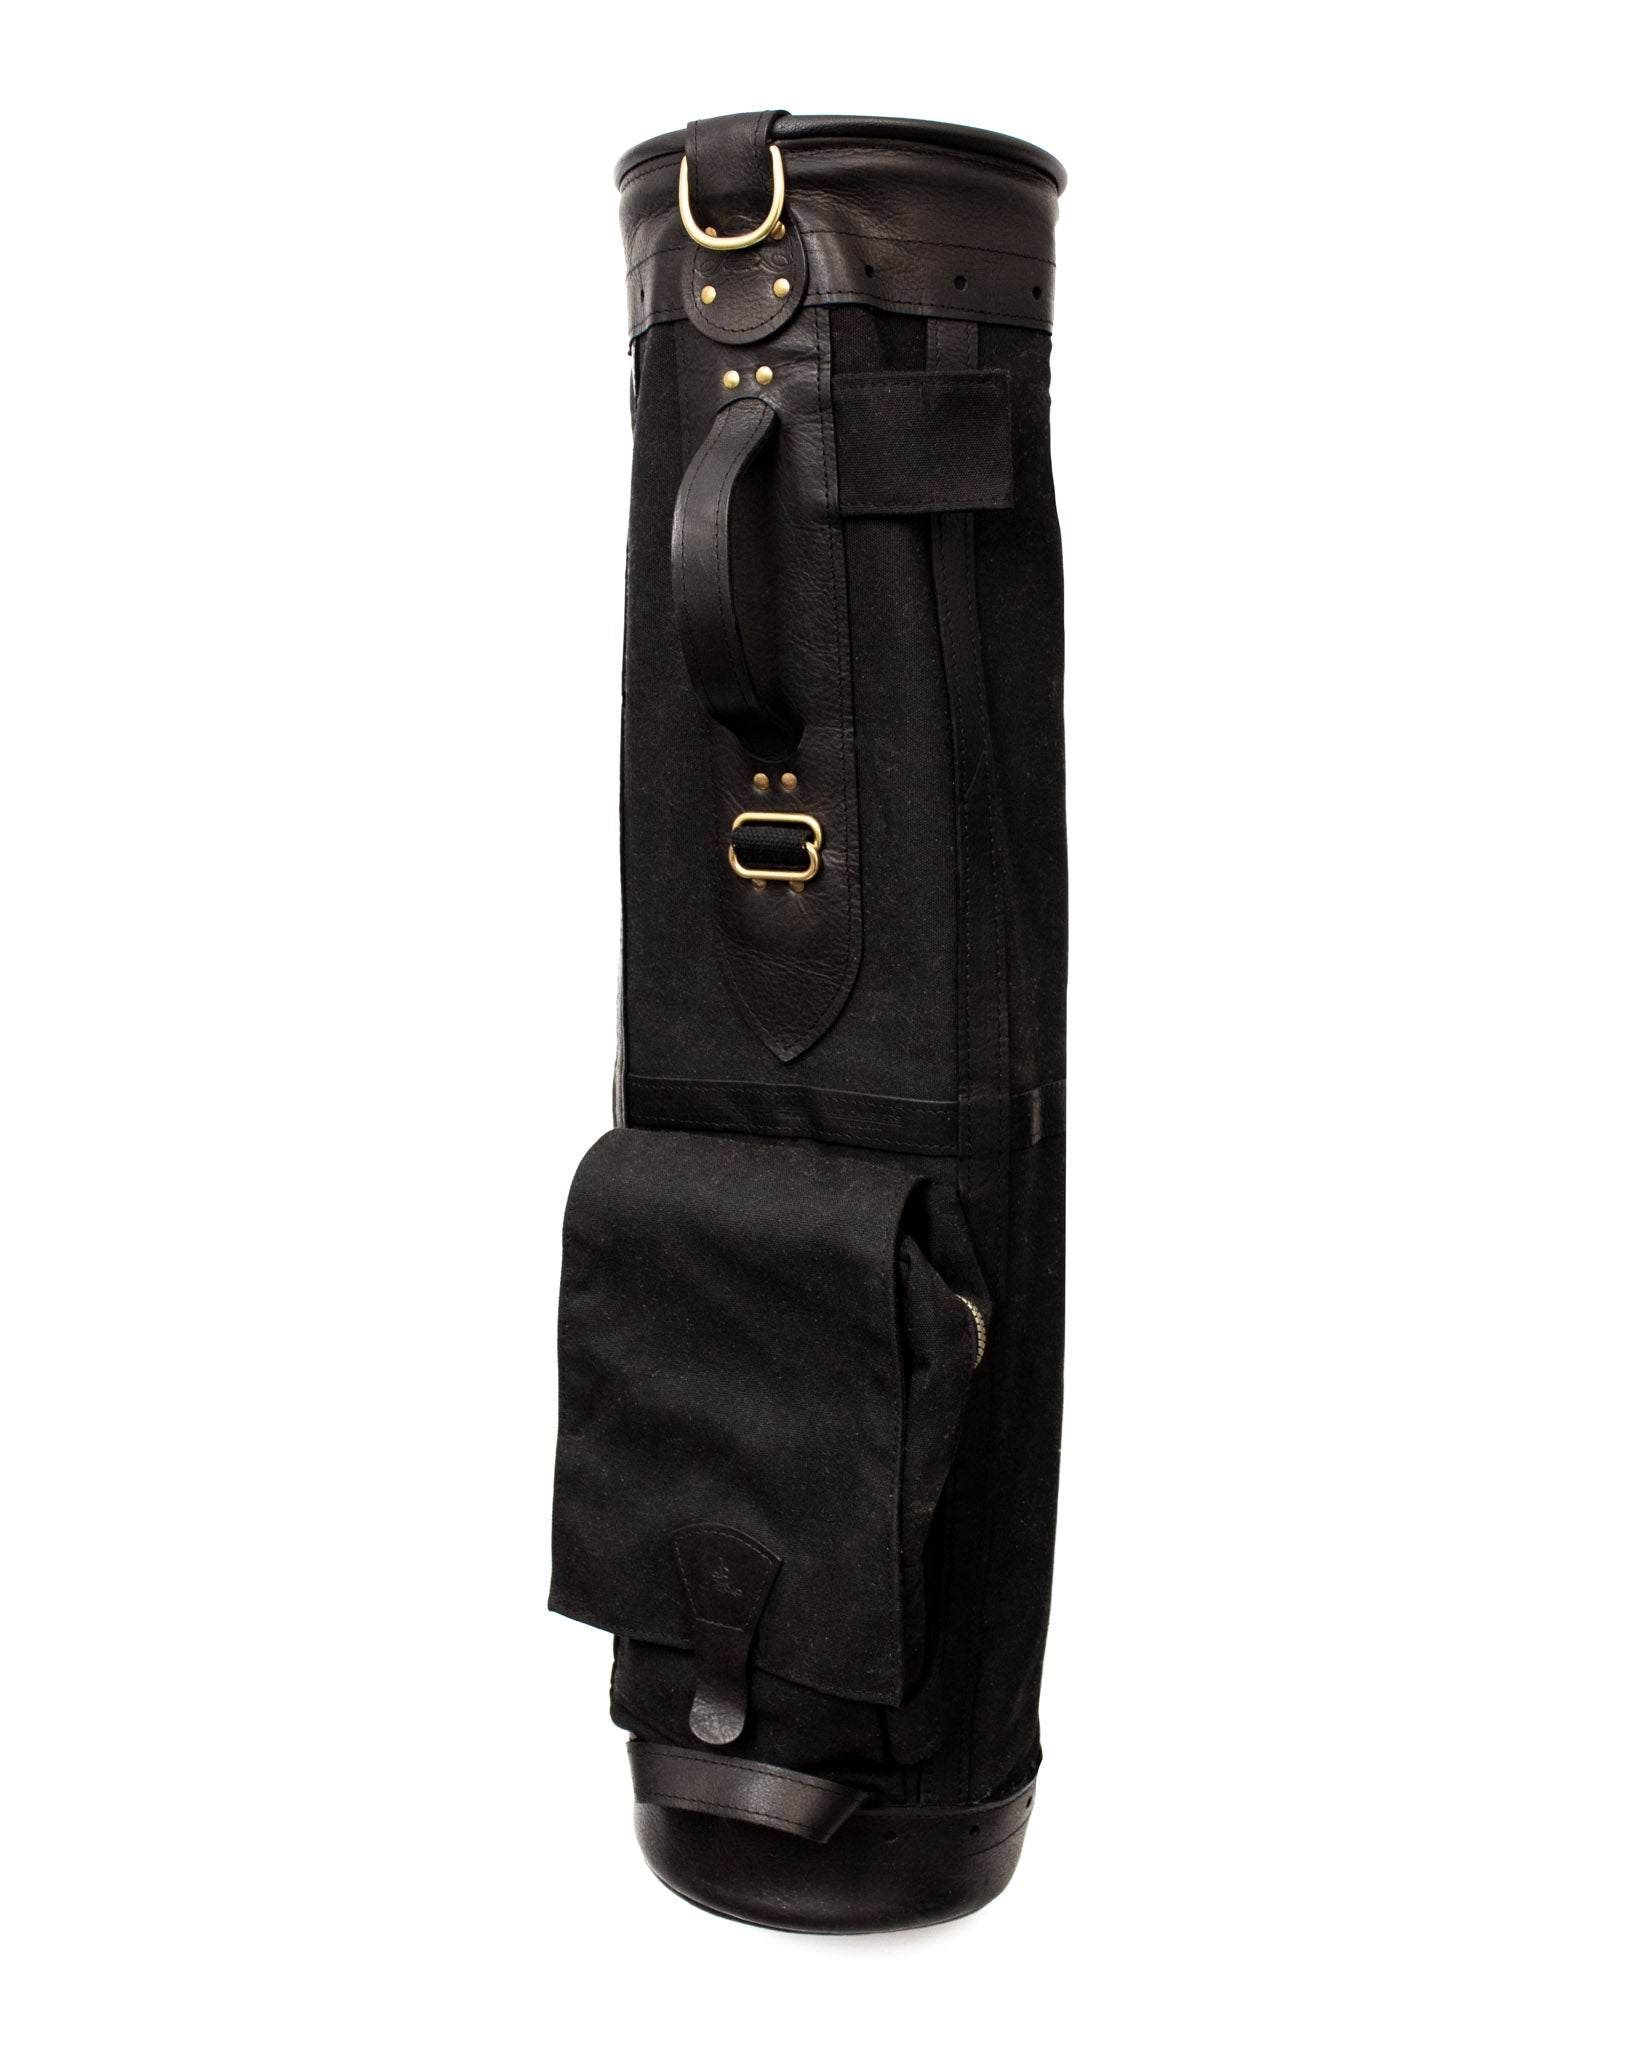 Sunday Style Golf Bag Black with Black Leather- Steurer & Jacoby